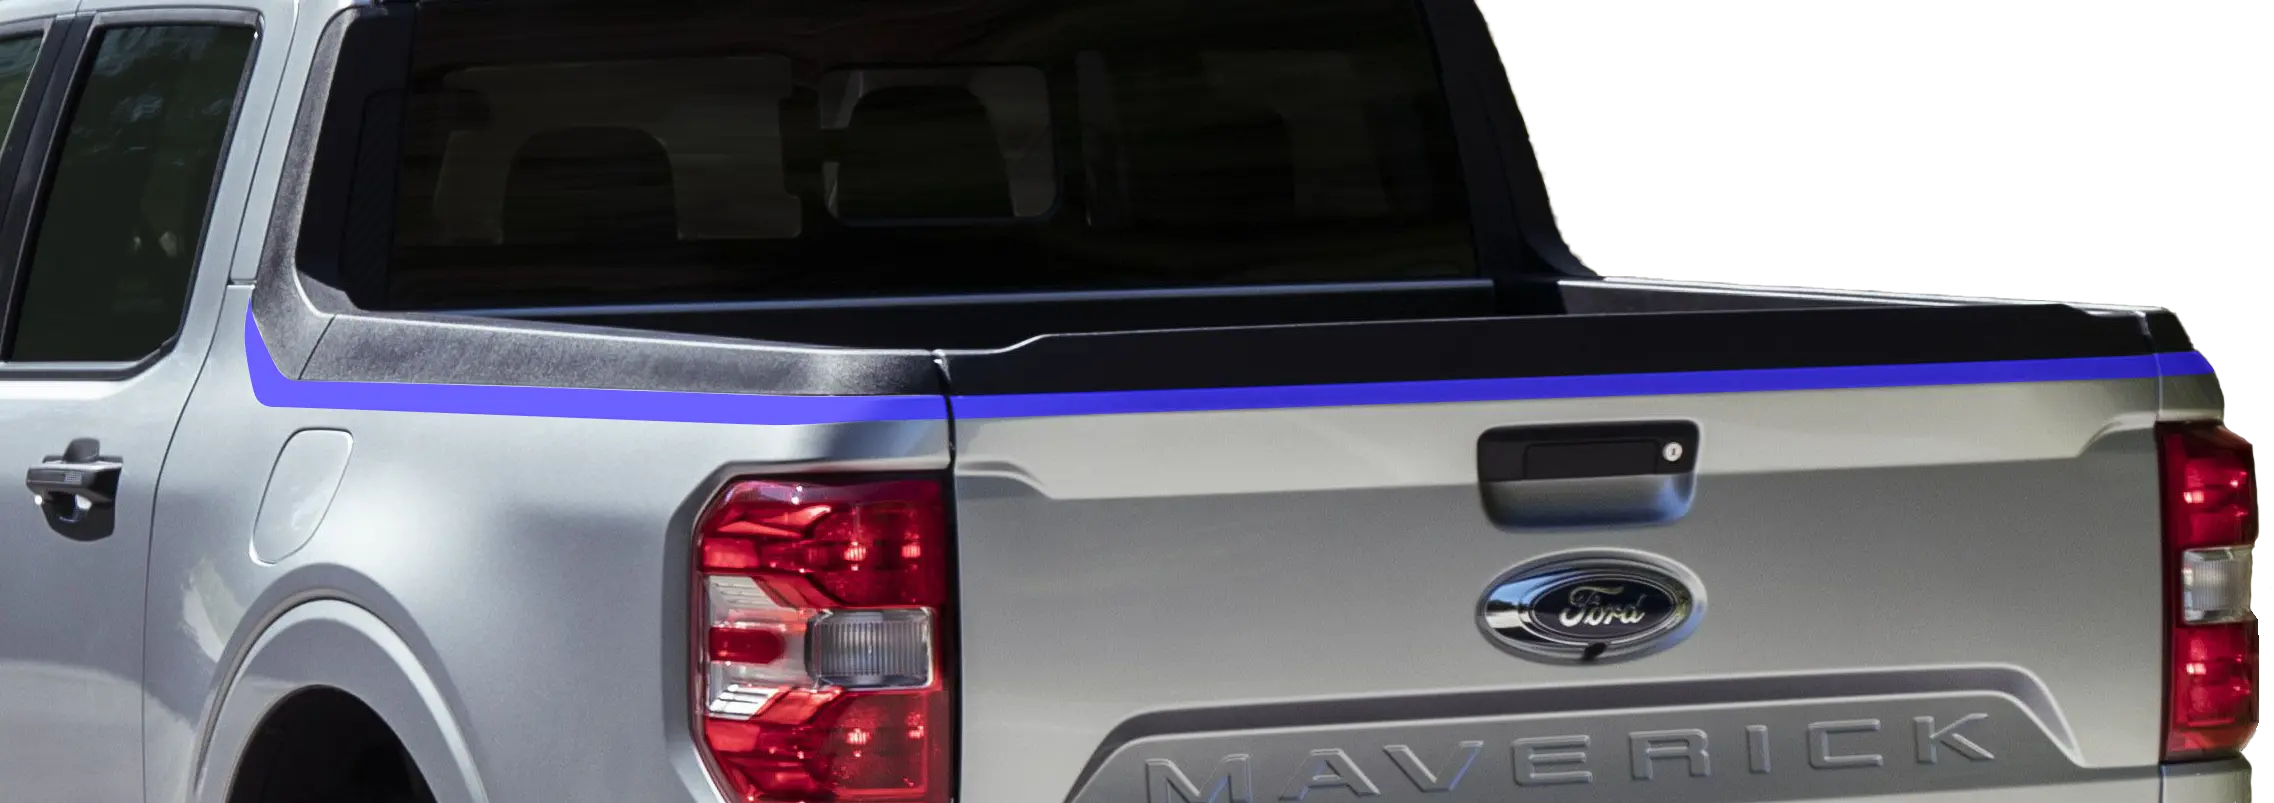 2022 to Present Ford Maverick Upper Bed and Tailgate Accent Graphic Stripe Decals . Installed on Car